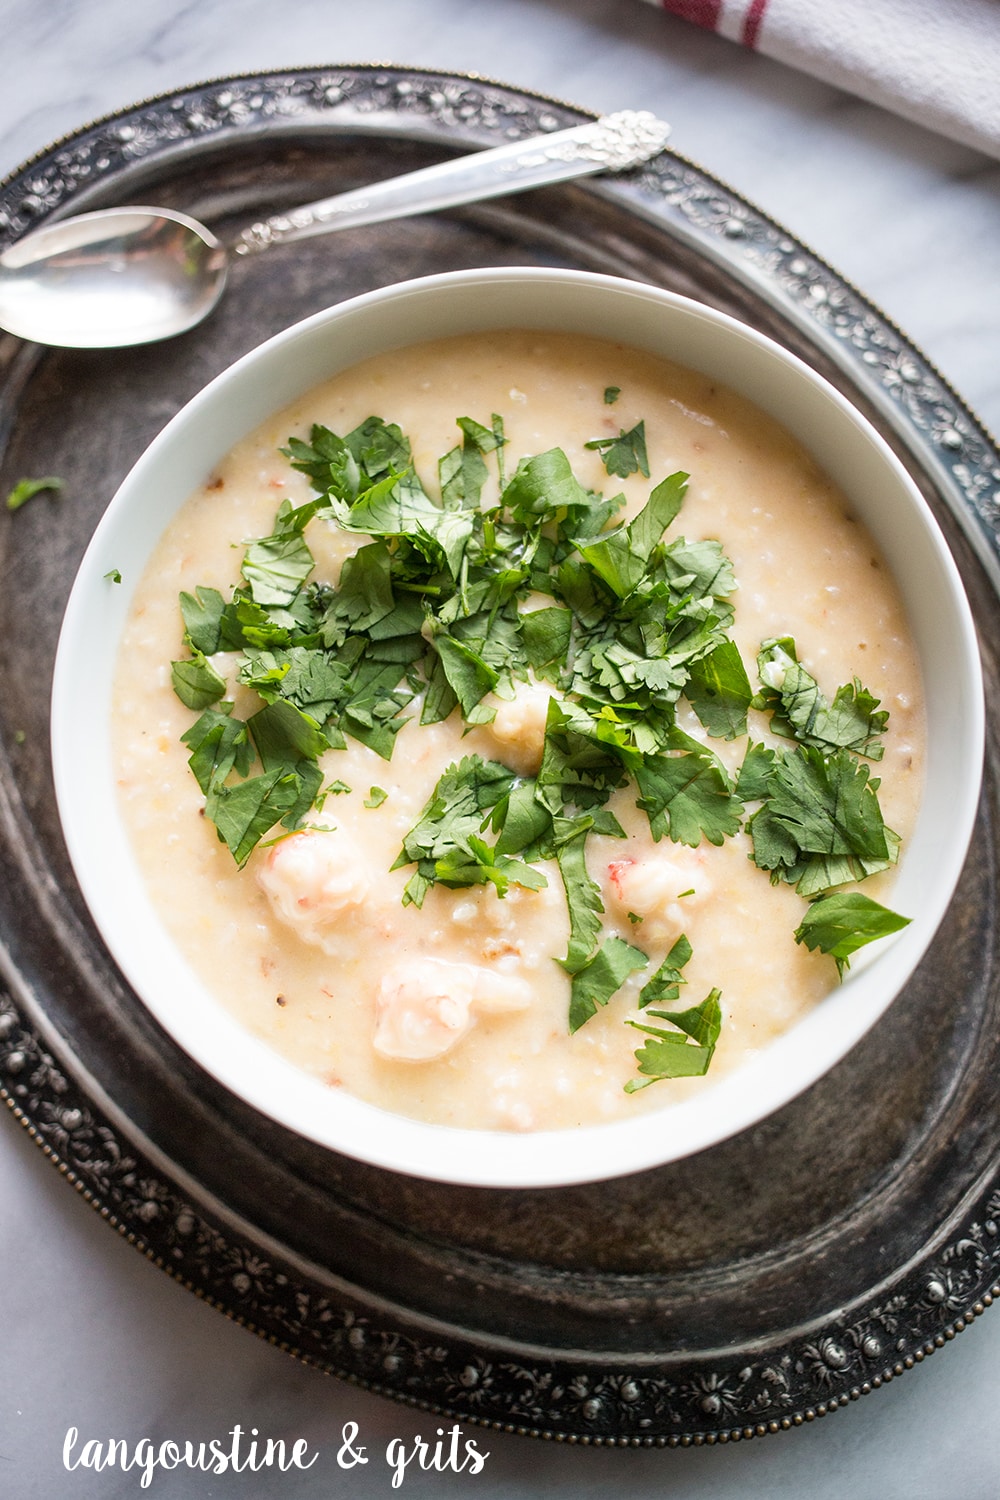 Langoustine makes a perfect pairing with cheesy grits for a twist on this southern classic!